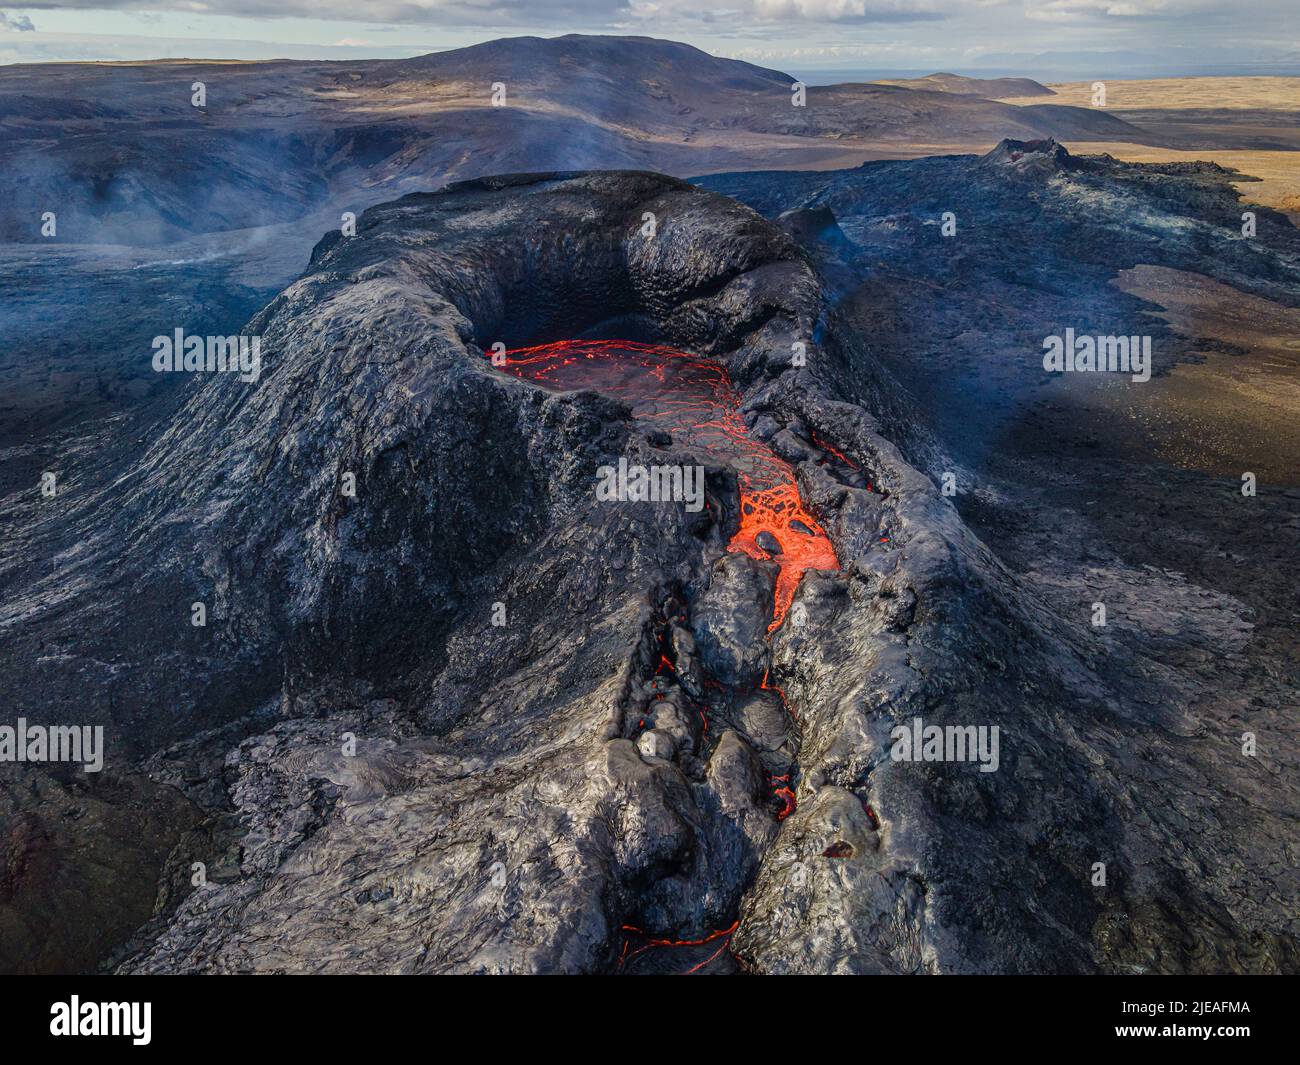 View into the crater of an active volcano with lava flow at the beginning of an eruption. Landscape on the Reykjanes Peninsula of Iceland. Puffs of sm Stock Photo